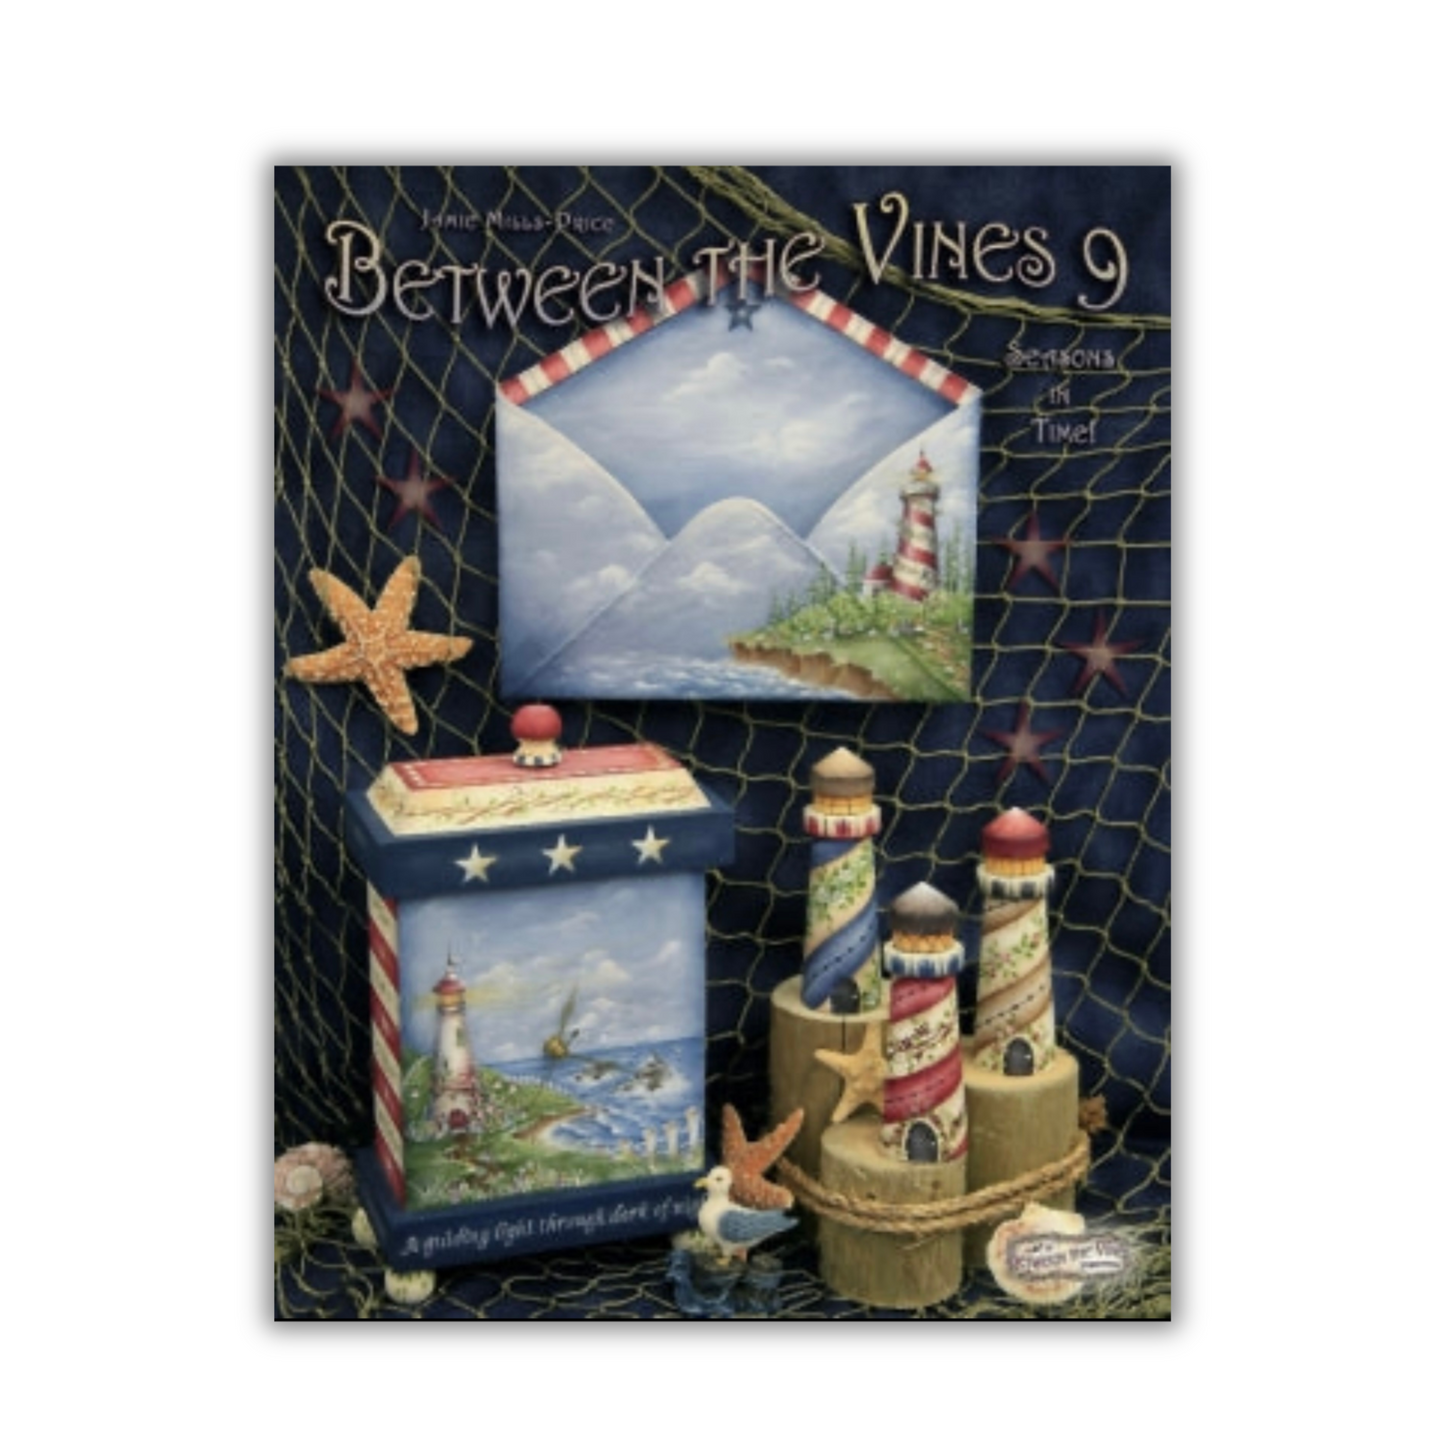 Between the vines vol  9 by Jamie mills price Out of the Wood